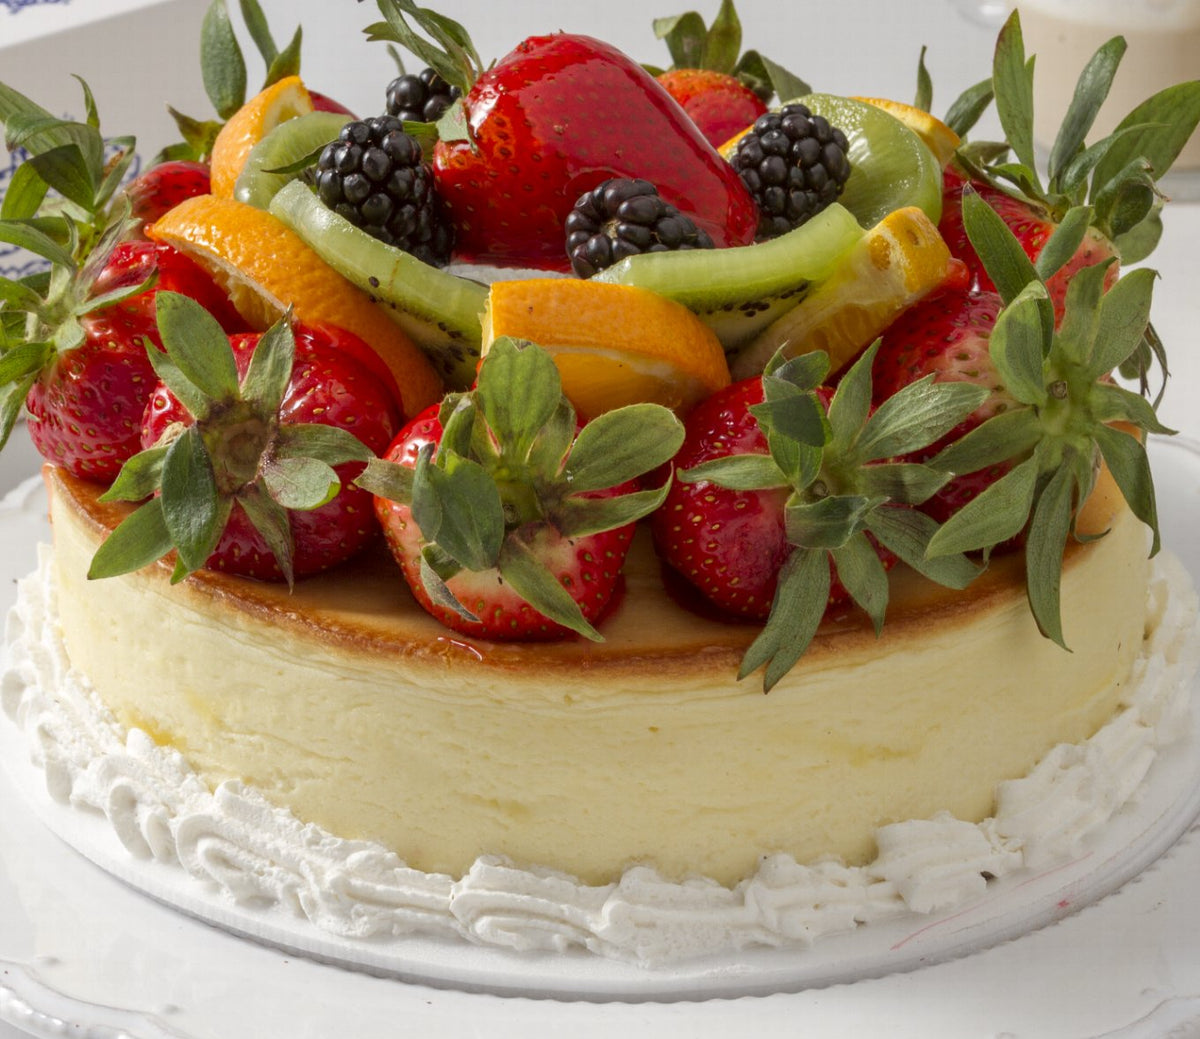 Cheesecake with mixed fruits. For Local Delivery or Curbside Pickup ONLY